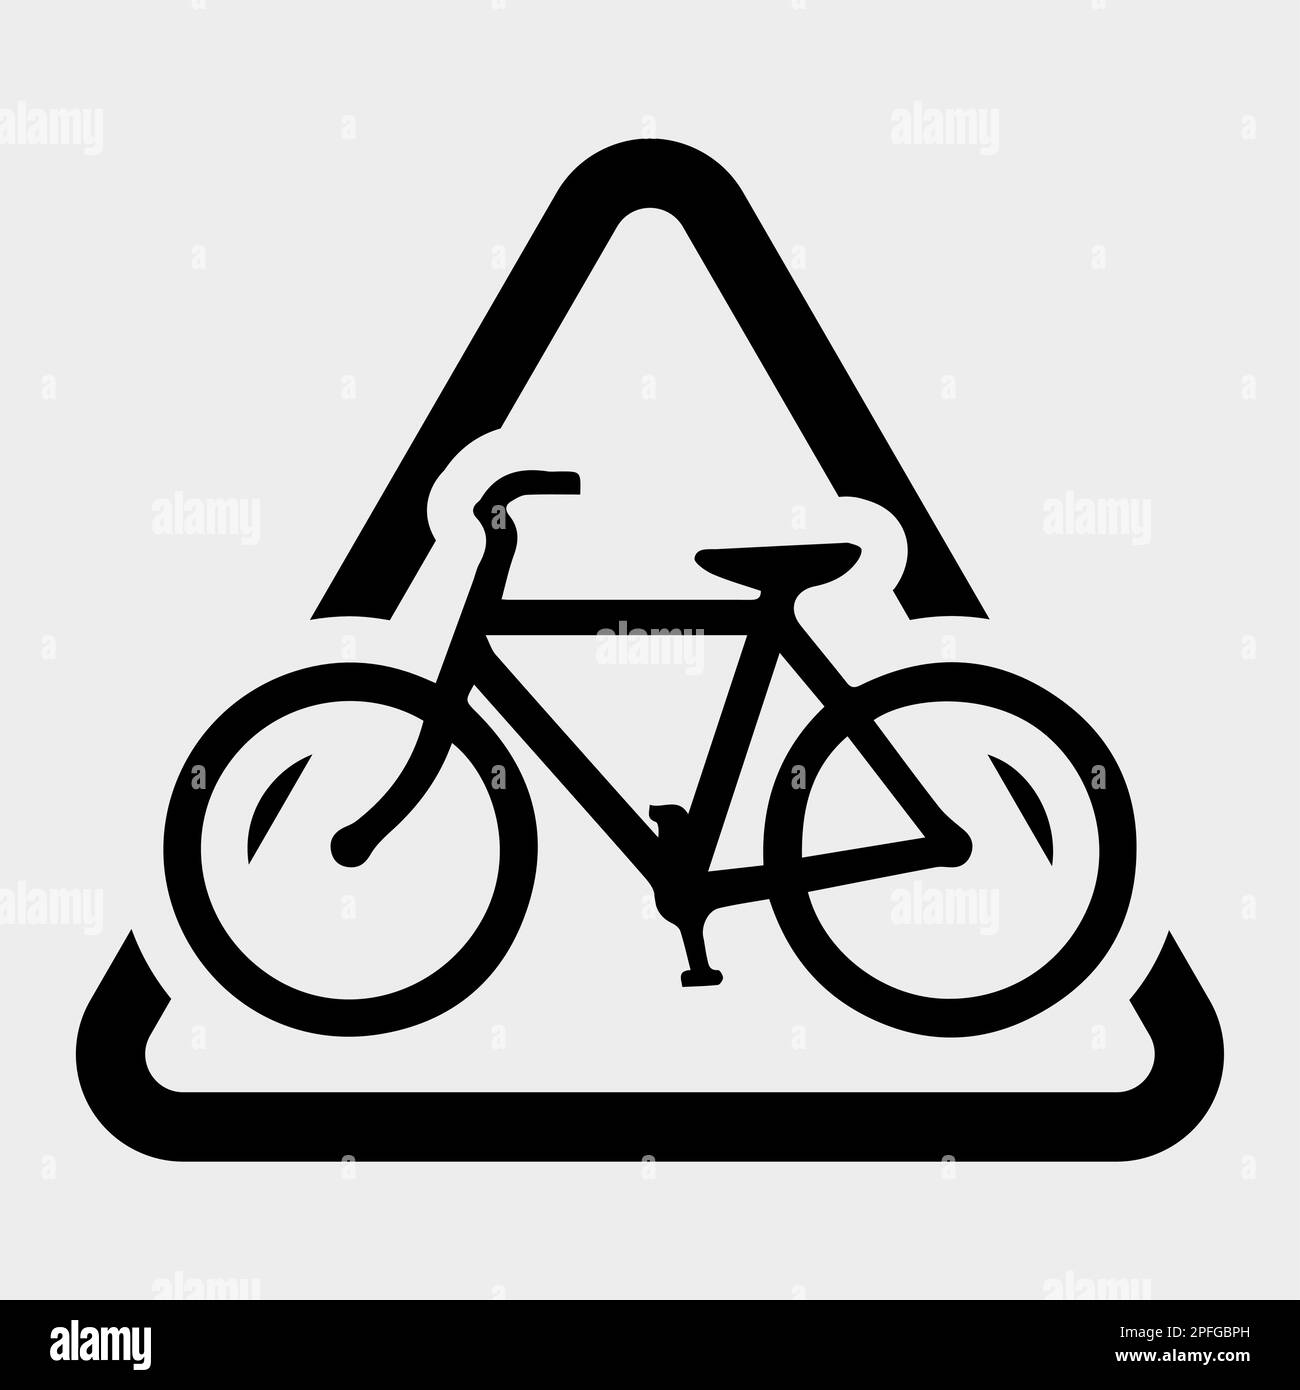 Bicycle Traffic Warning Sign isolated on white background.Vector illustration Stock Vector